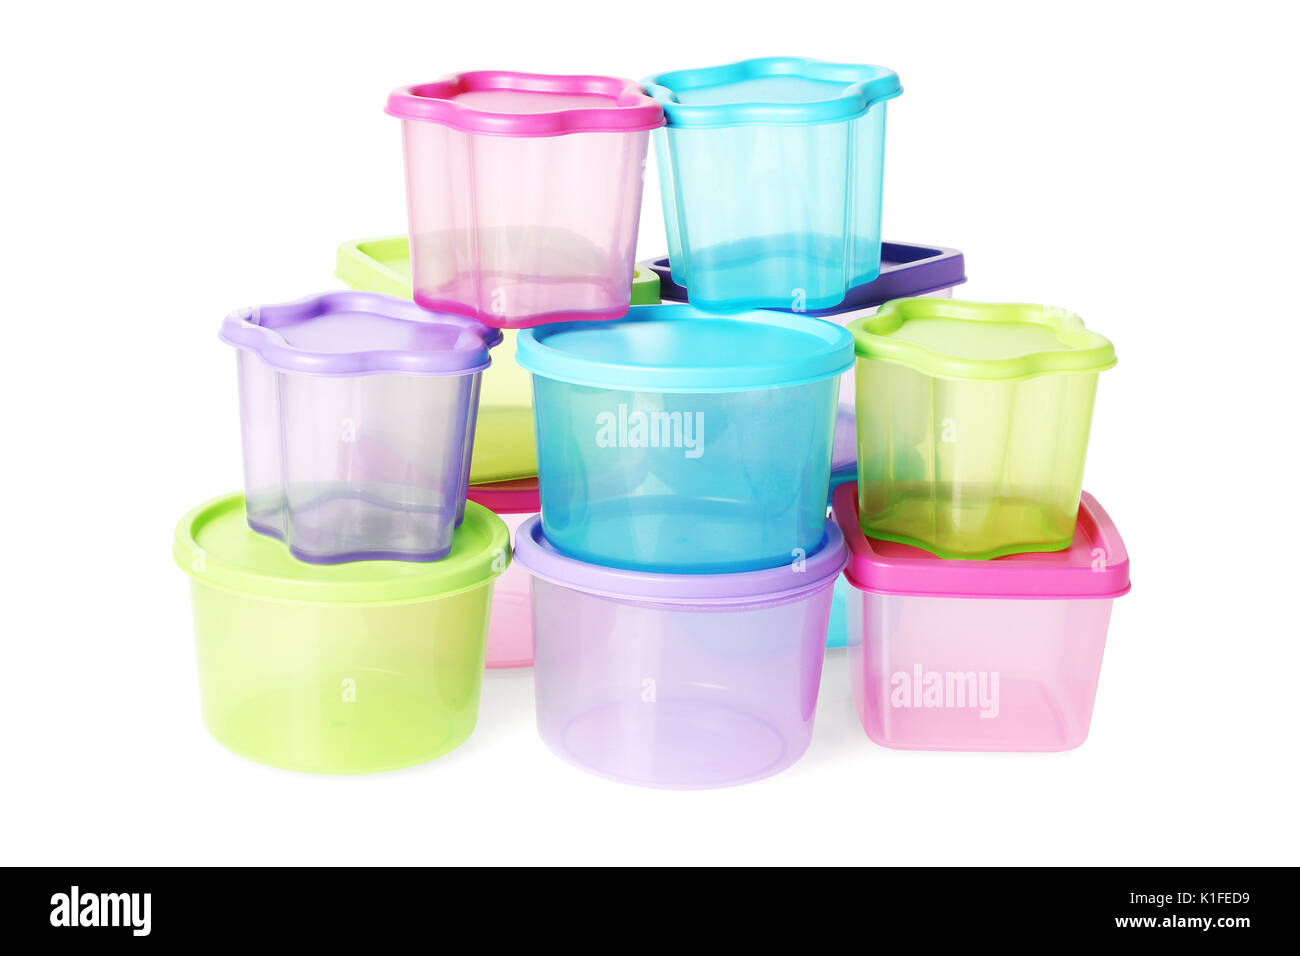 Colorful containers